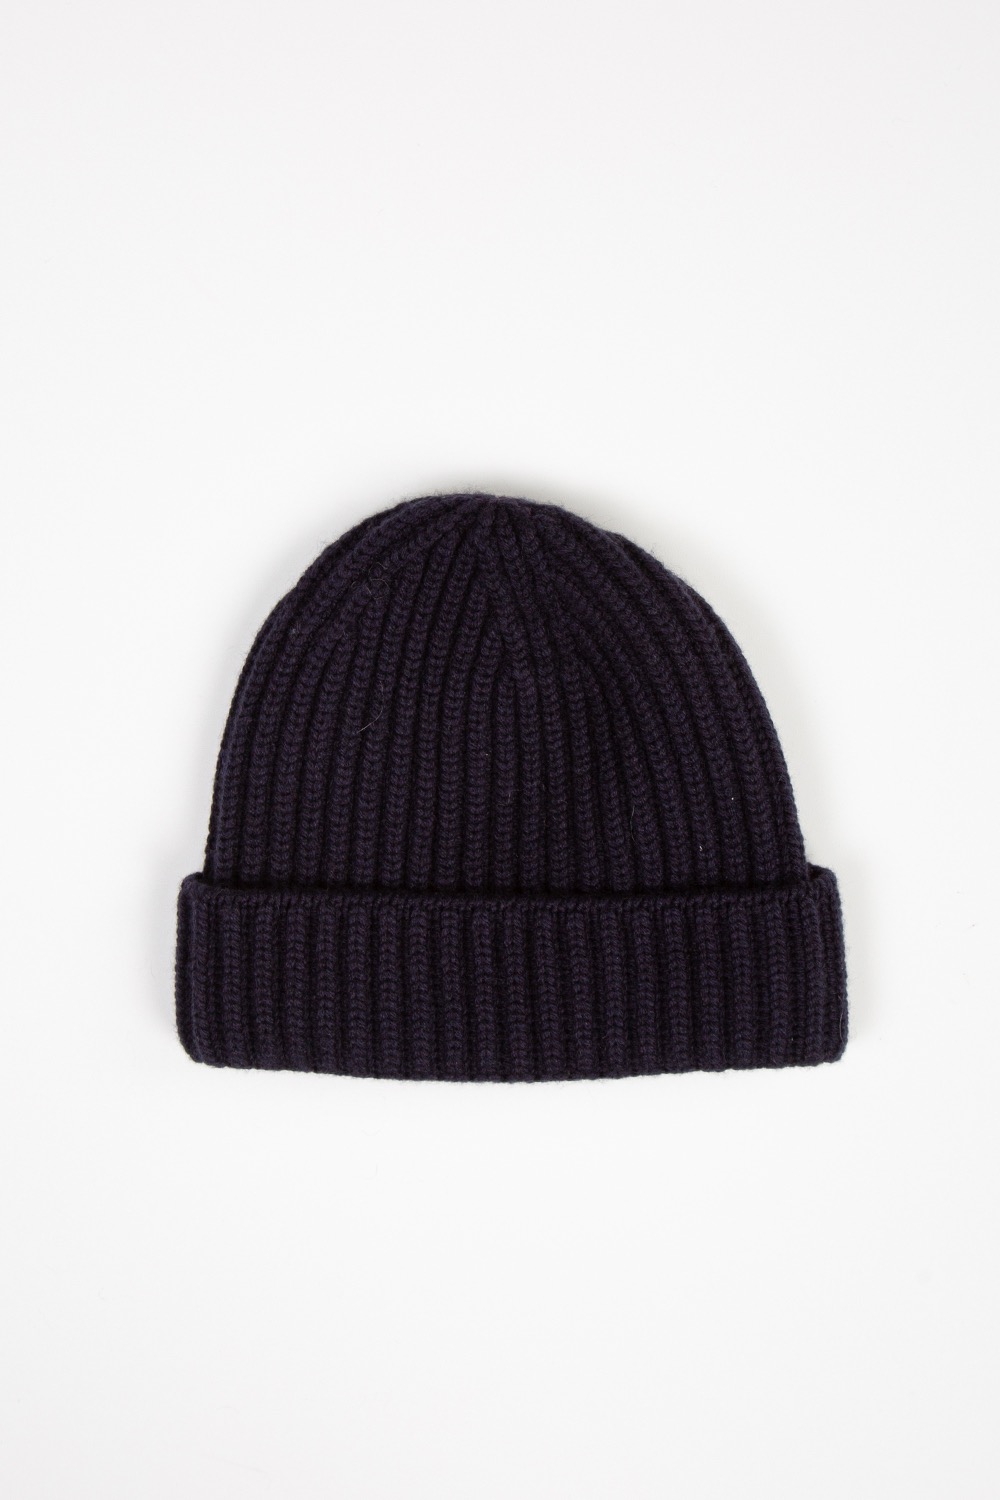 (CARRY OVER) NAVY CASHMERE BEANIE HAT